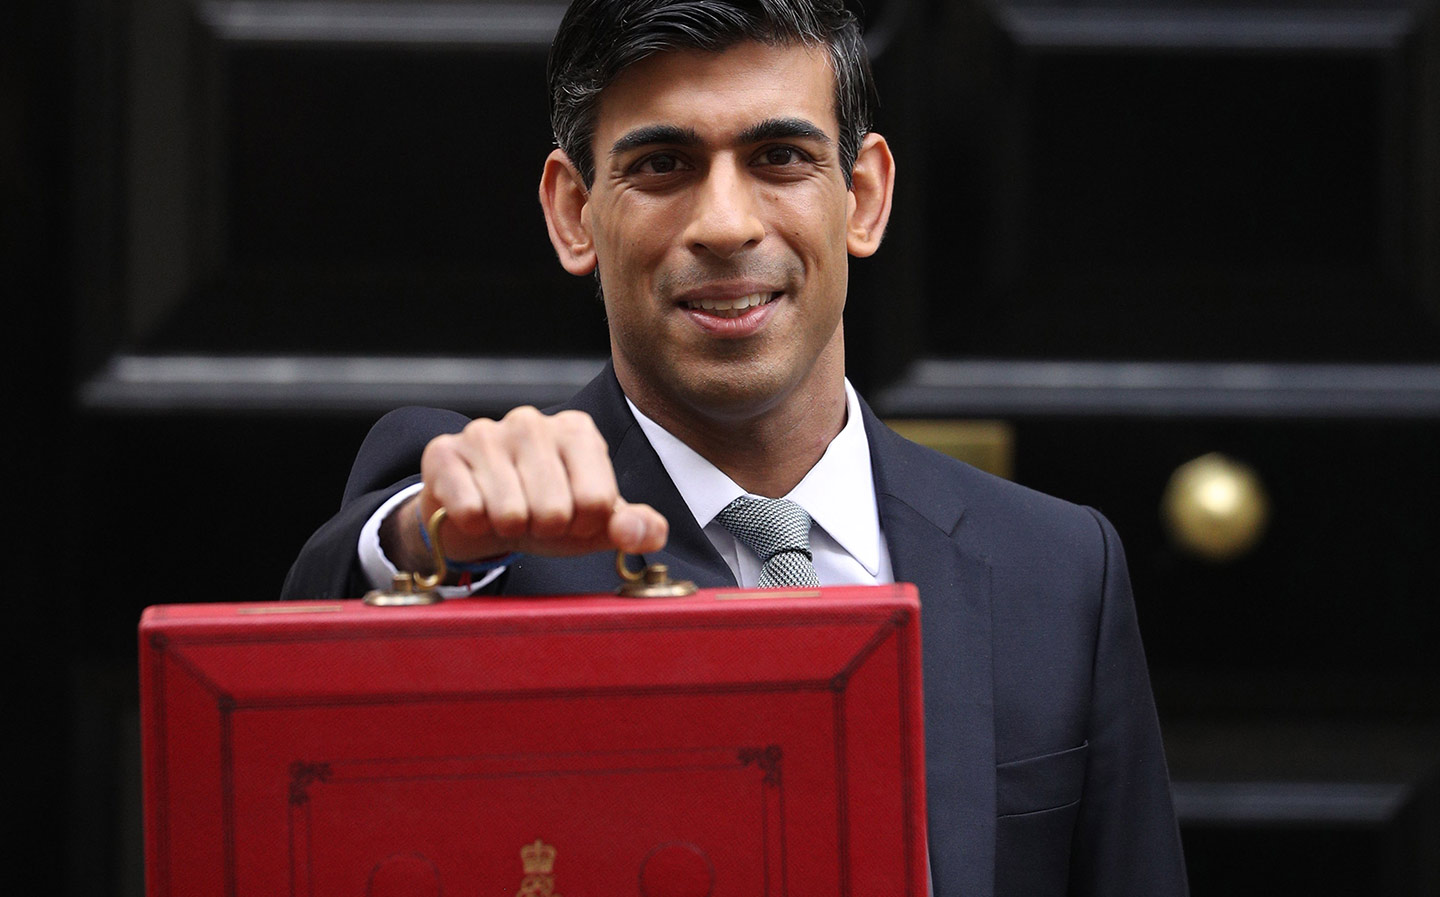 Rishi Sunak Chancellor of the Exchequer - Budget 2020